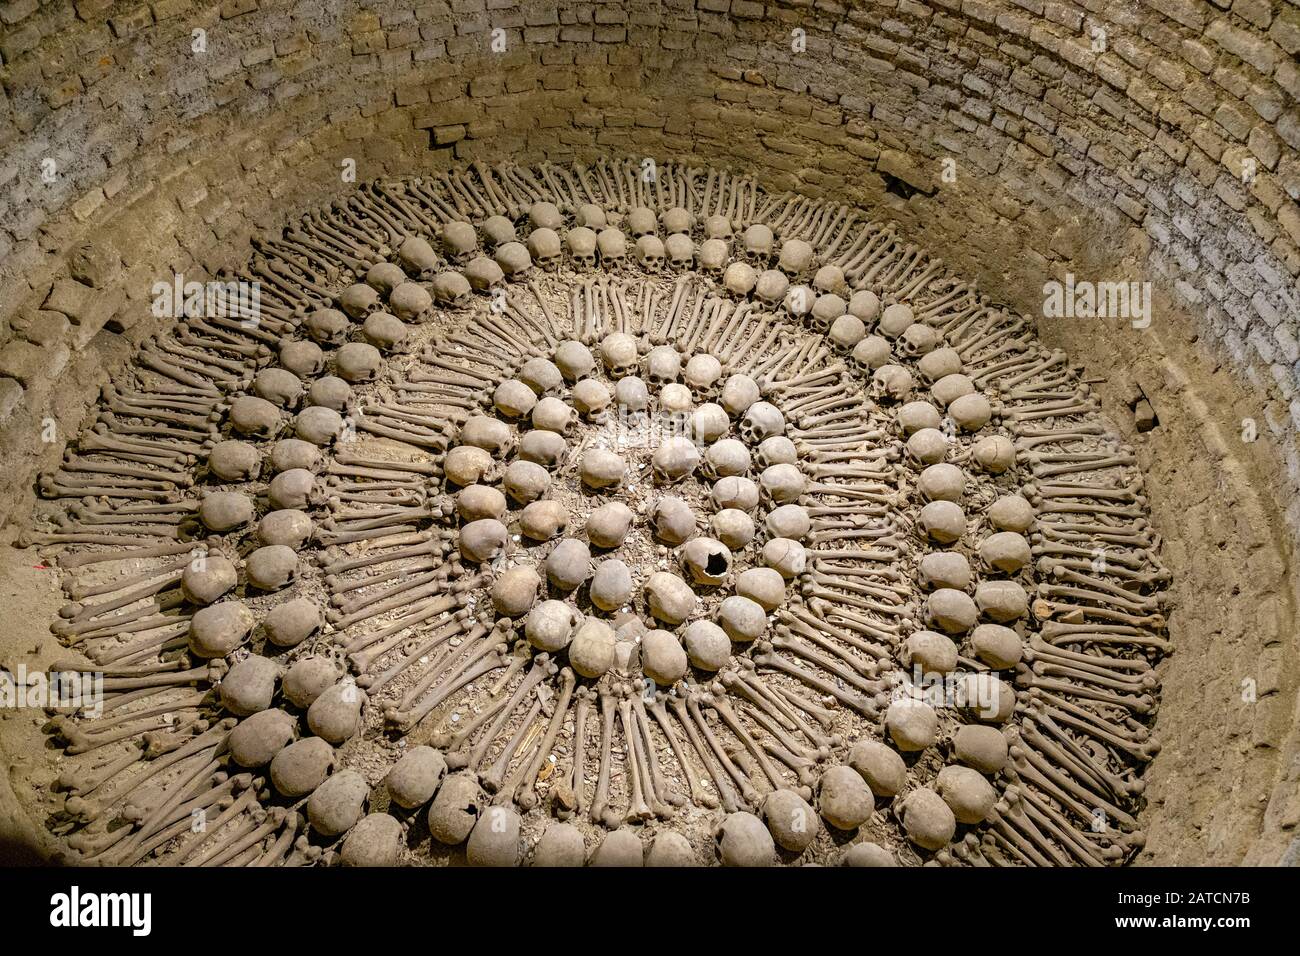 Human remains, skulls and bones arranged geometrically in a crypt, San Francisco Monastery and Church Catacombs, Lima, Peru Stock Photo